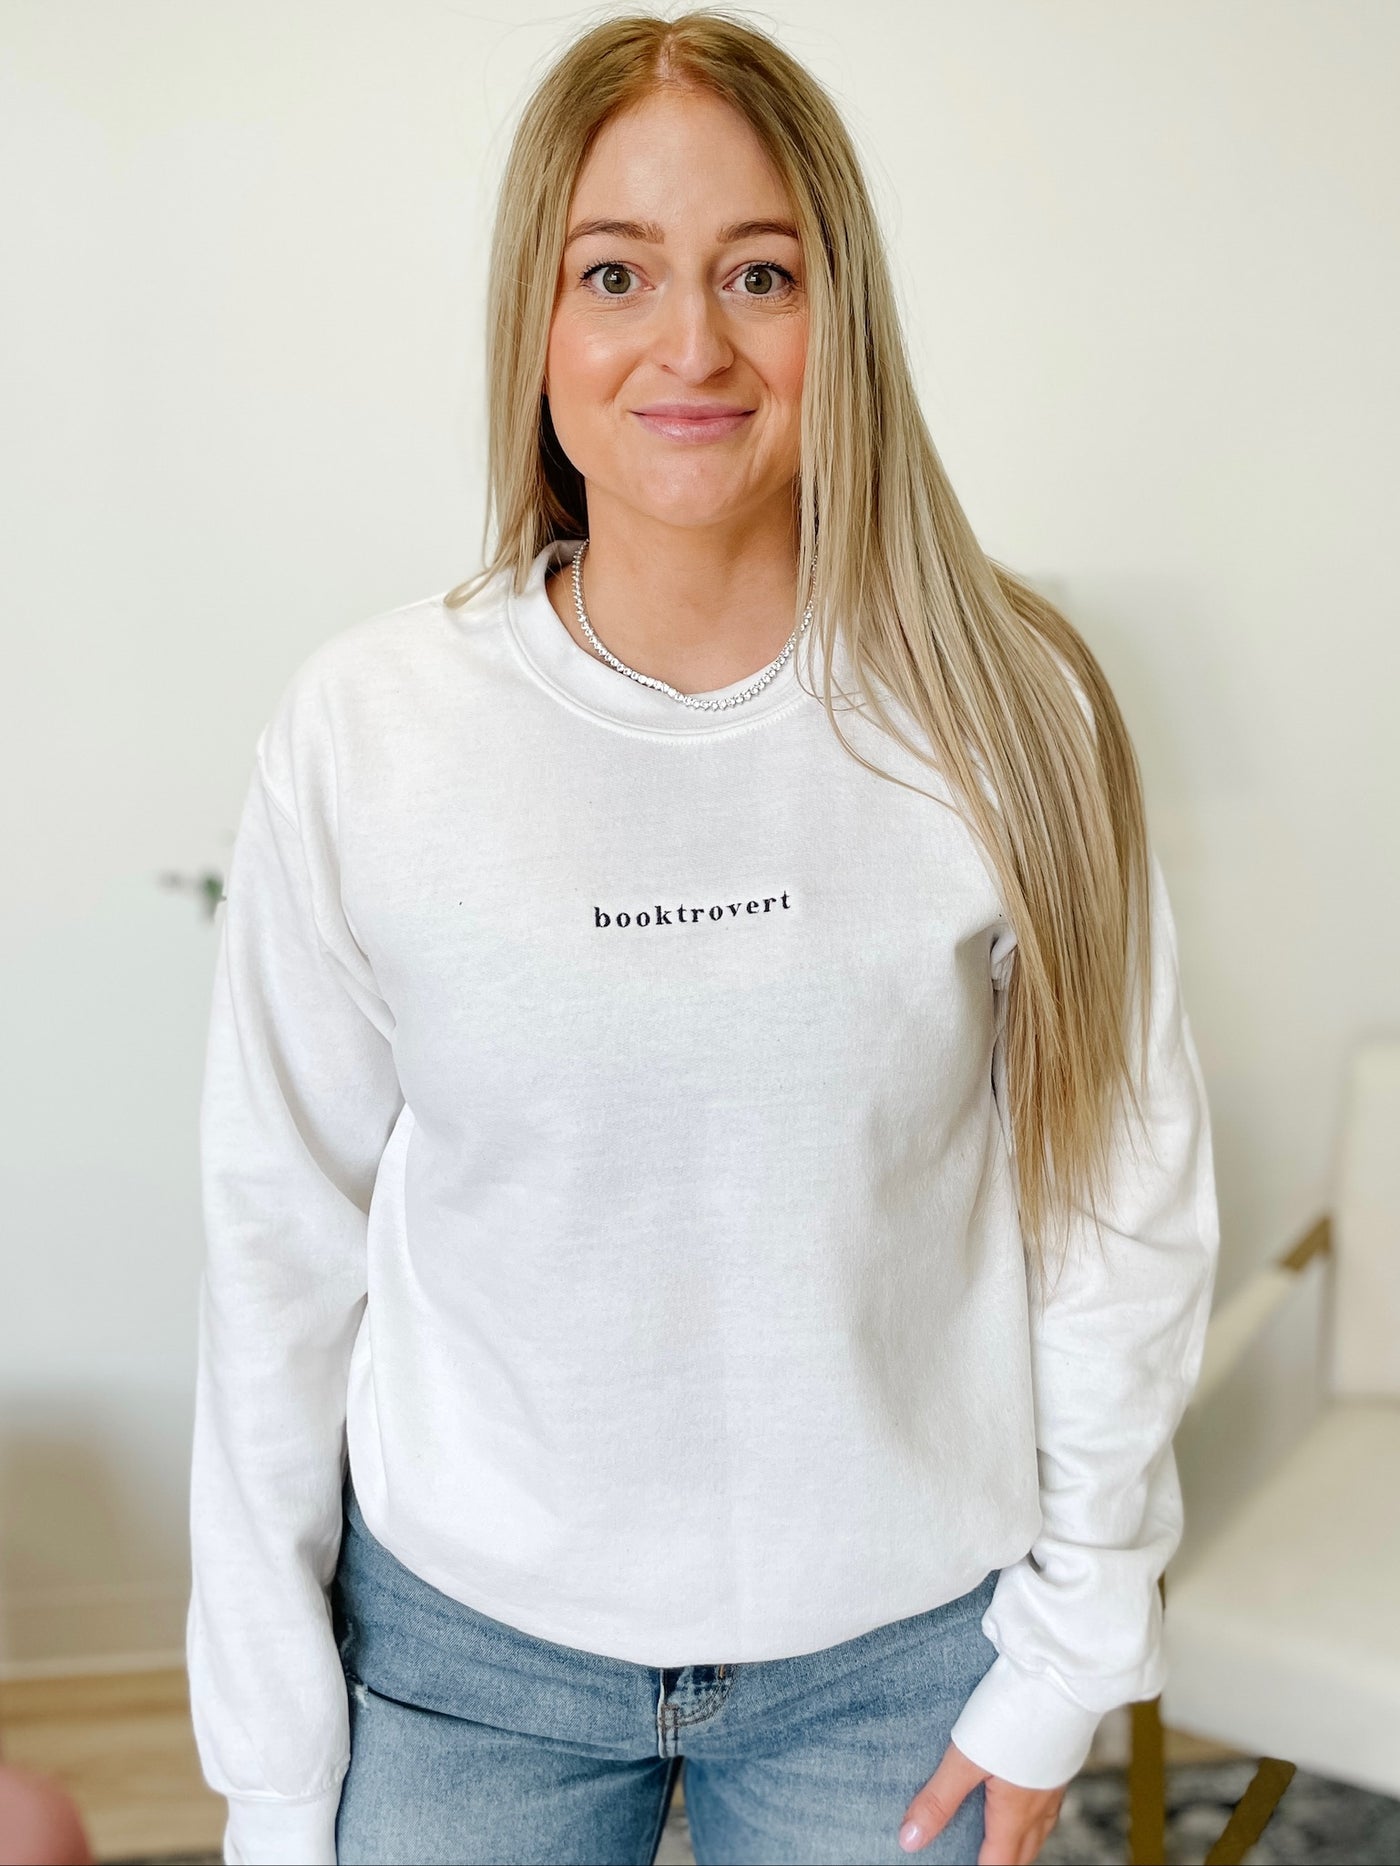 Booktrovert Embroidered Crewneck in White